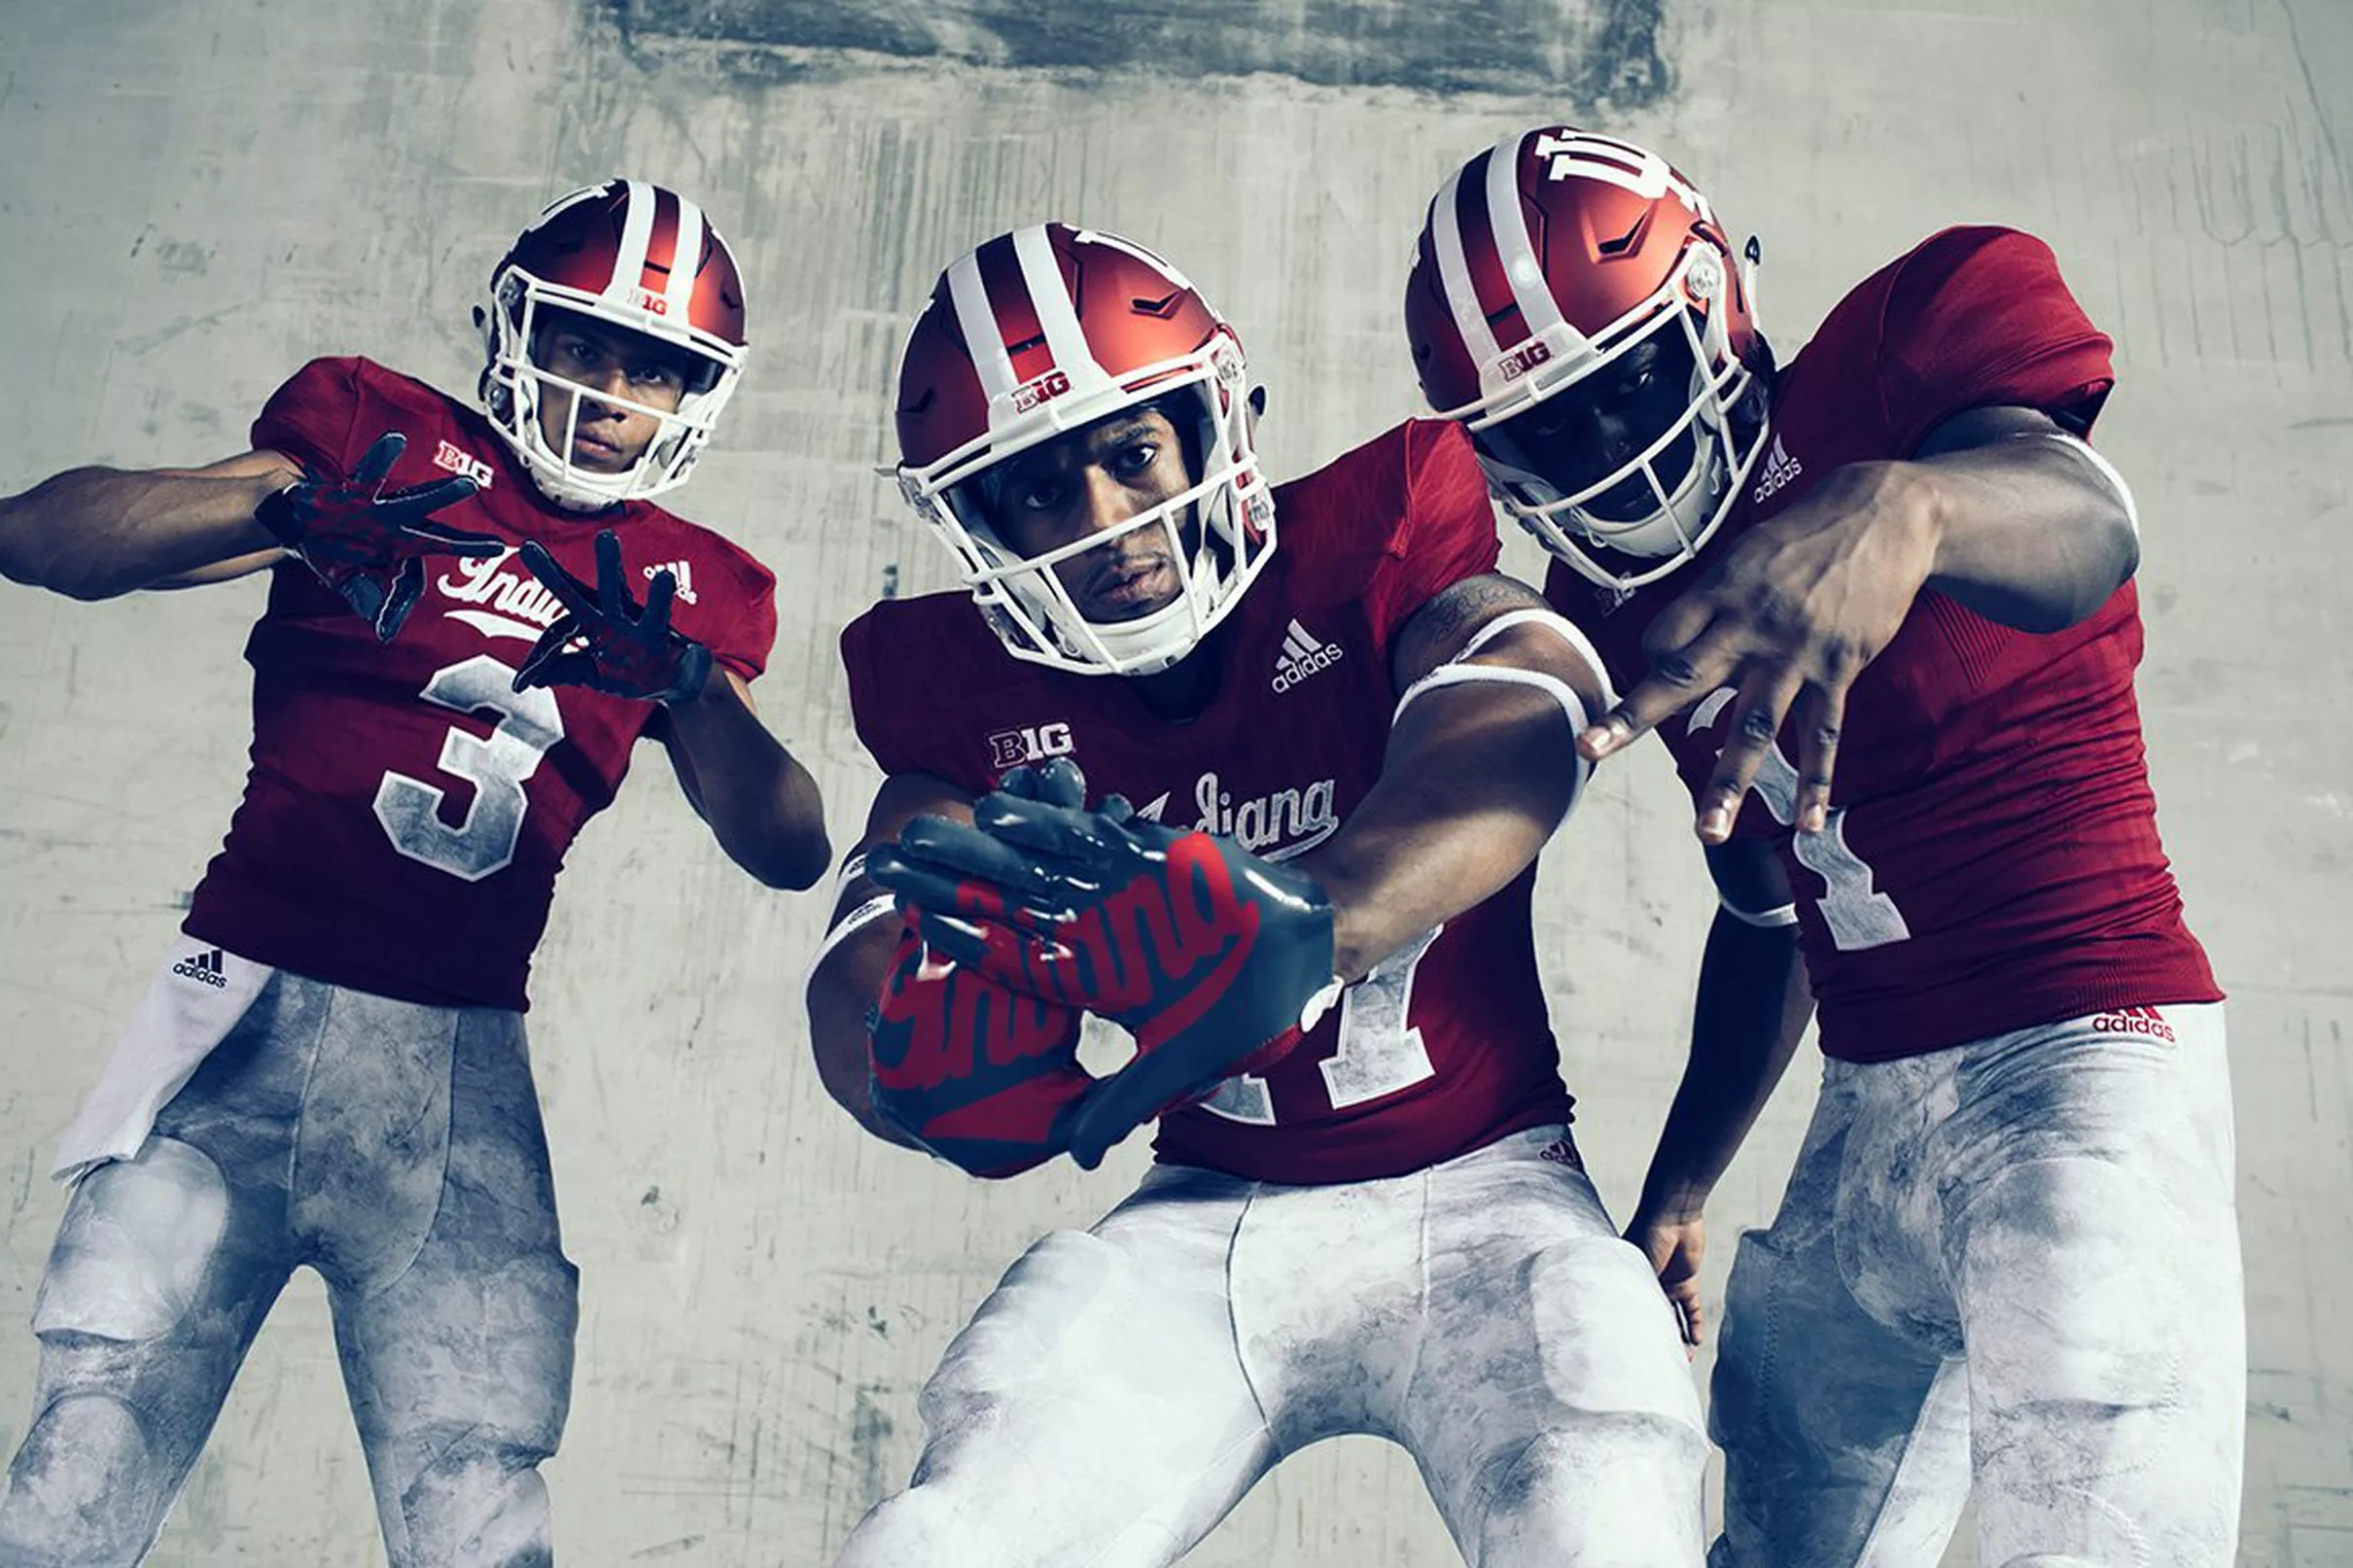 Indiana football has new uniforms from adidas that honor Terry Hoeppner